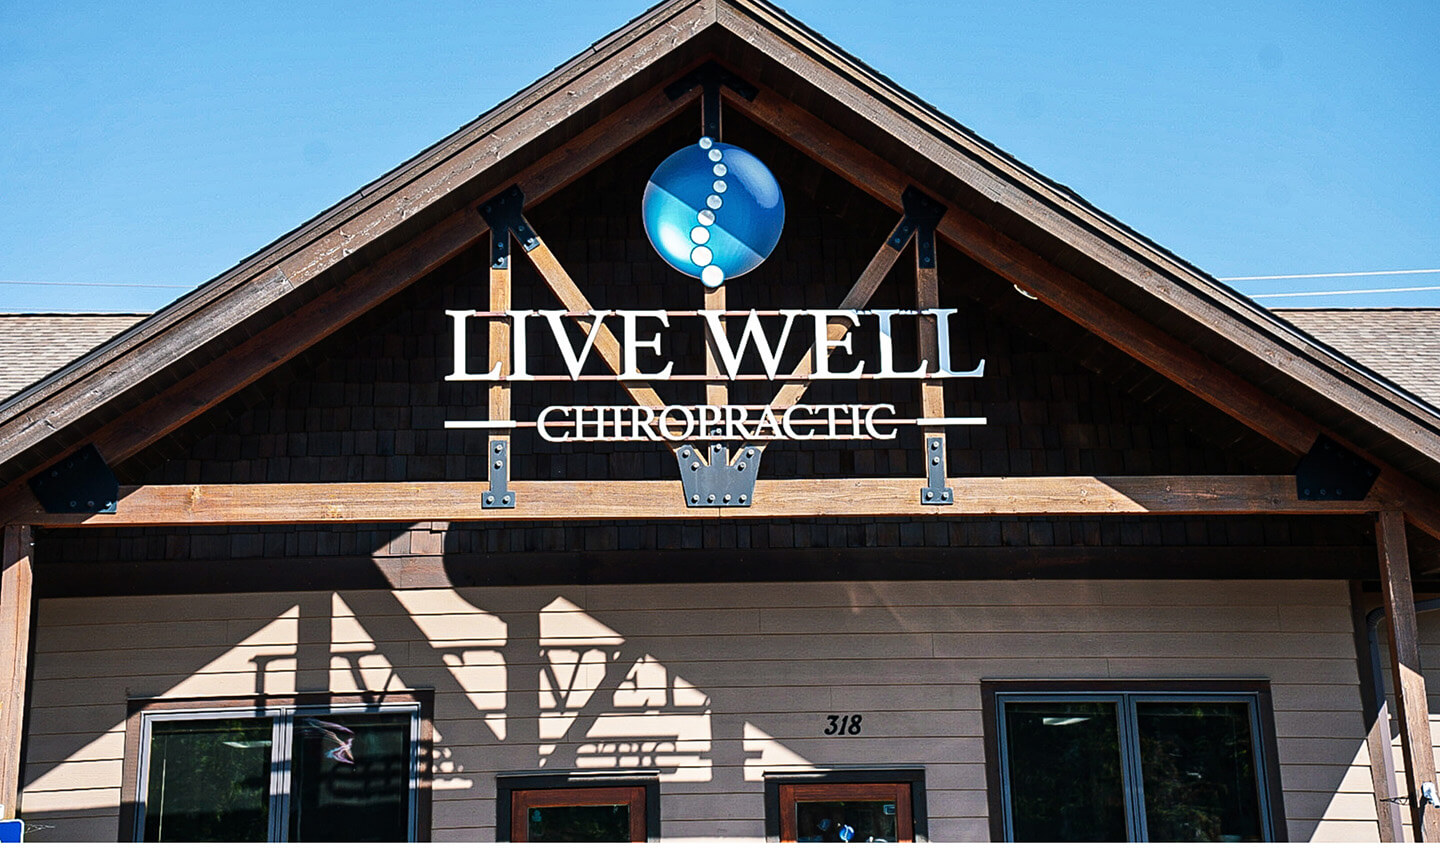 Live Well Chiropractic building